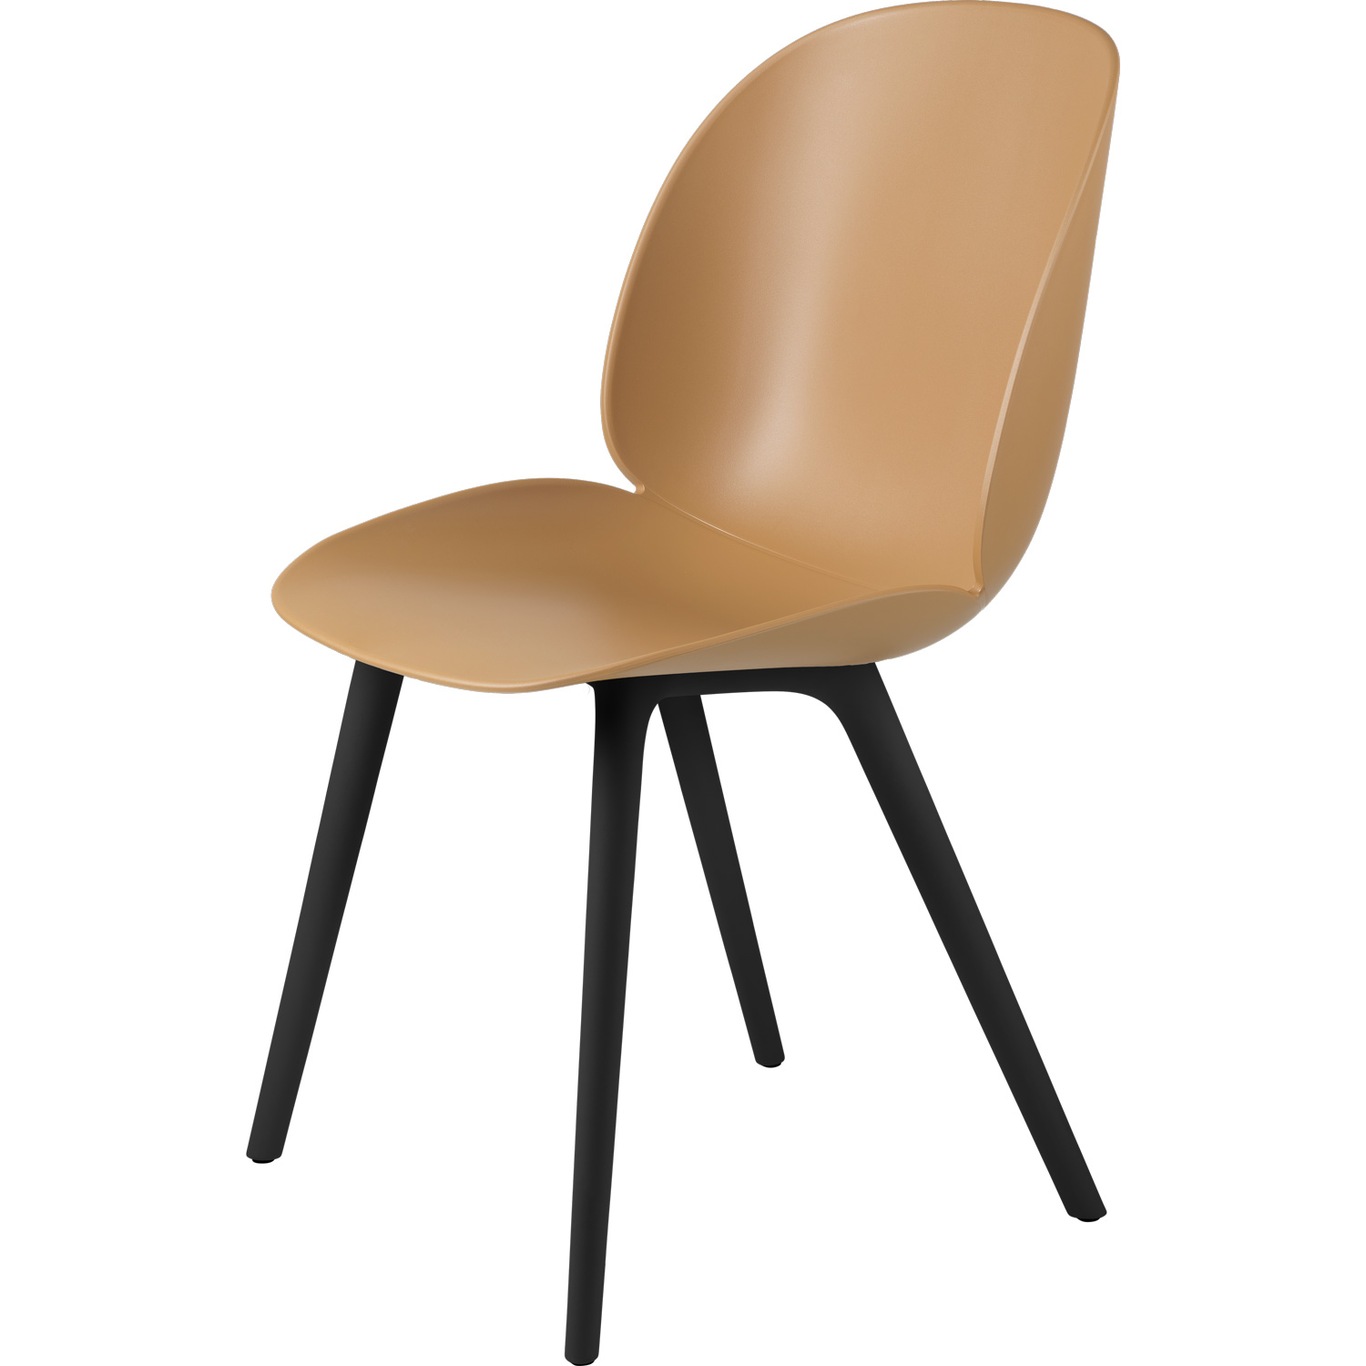 Beetle Chair Un-upholstered Plastic Black Base, Amber Brown